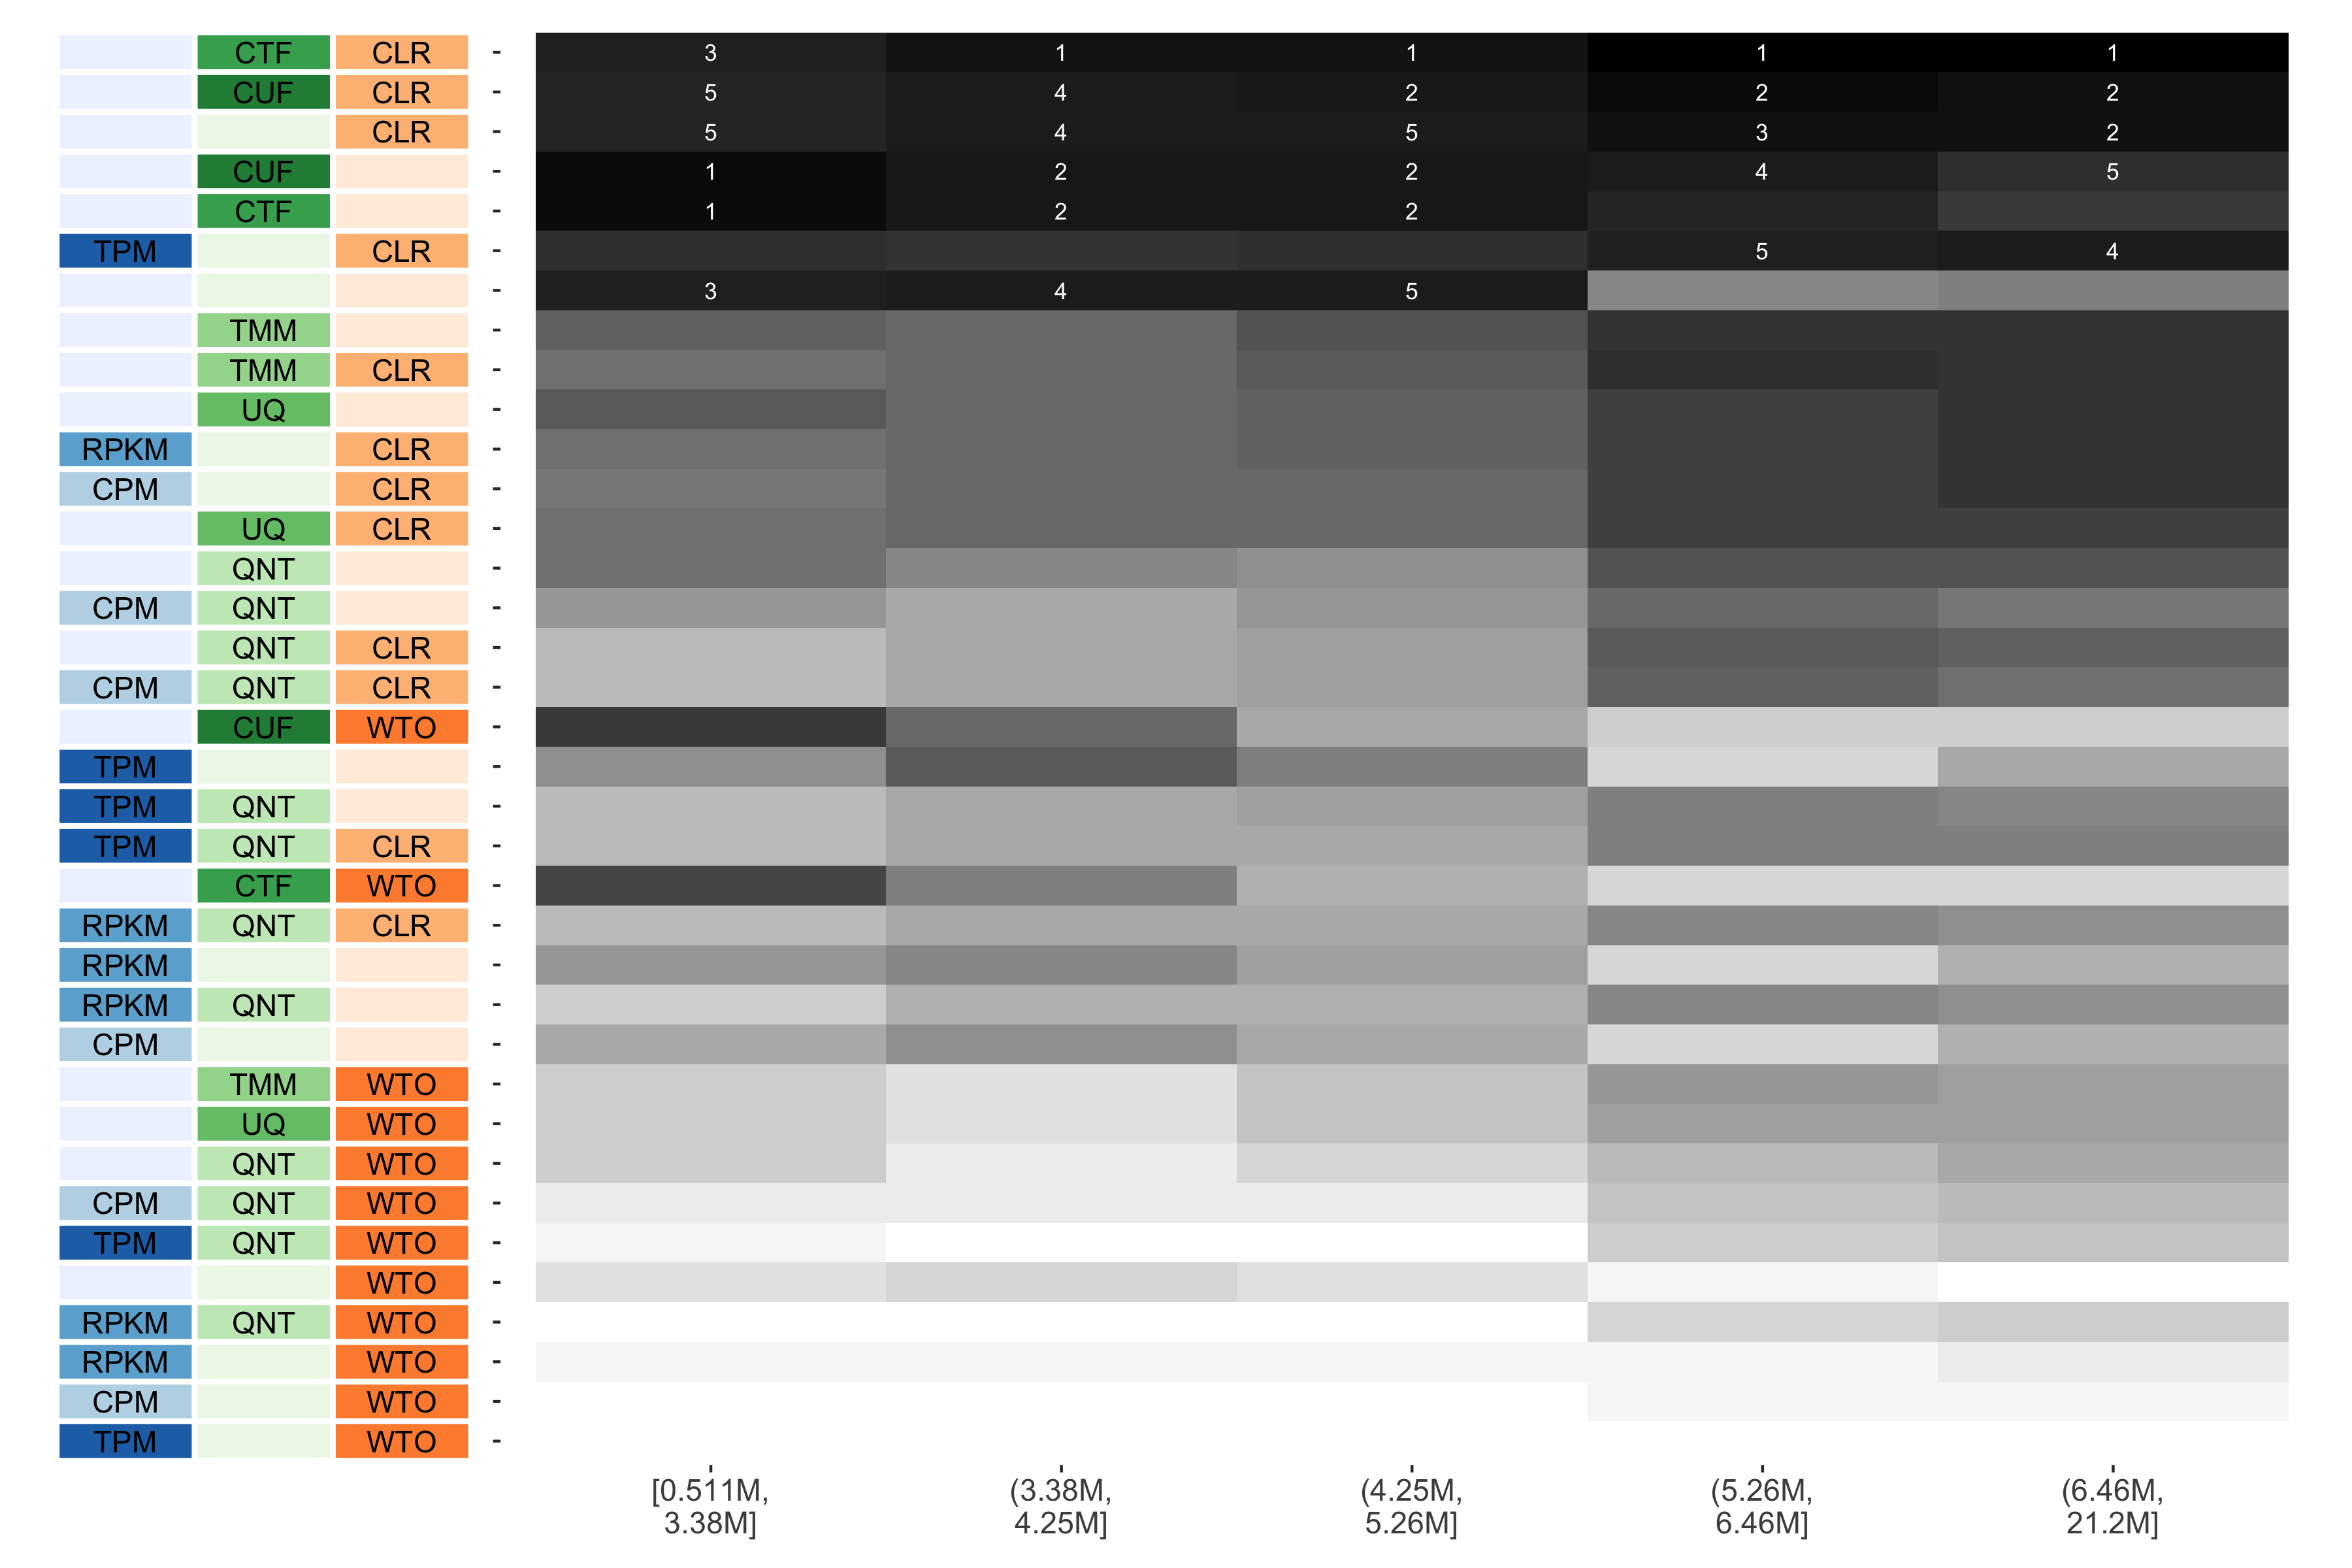 The heatmap shows the number of times (cell color) each workflow (row) outperforms other workflows as read count diversity varies (columns), when the resulting coexpression networks are evaluated based on the tissue-aware gold standard. The darkest colors indicate workflows that are significantly better than the most other workflows. In addition, the top 5 workflows in each column are marked with their rank, with ties given minimum rank.